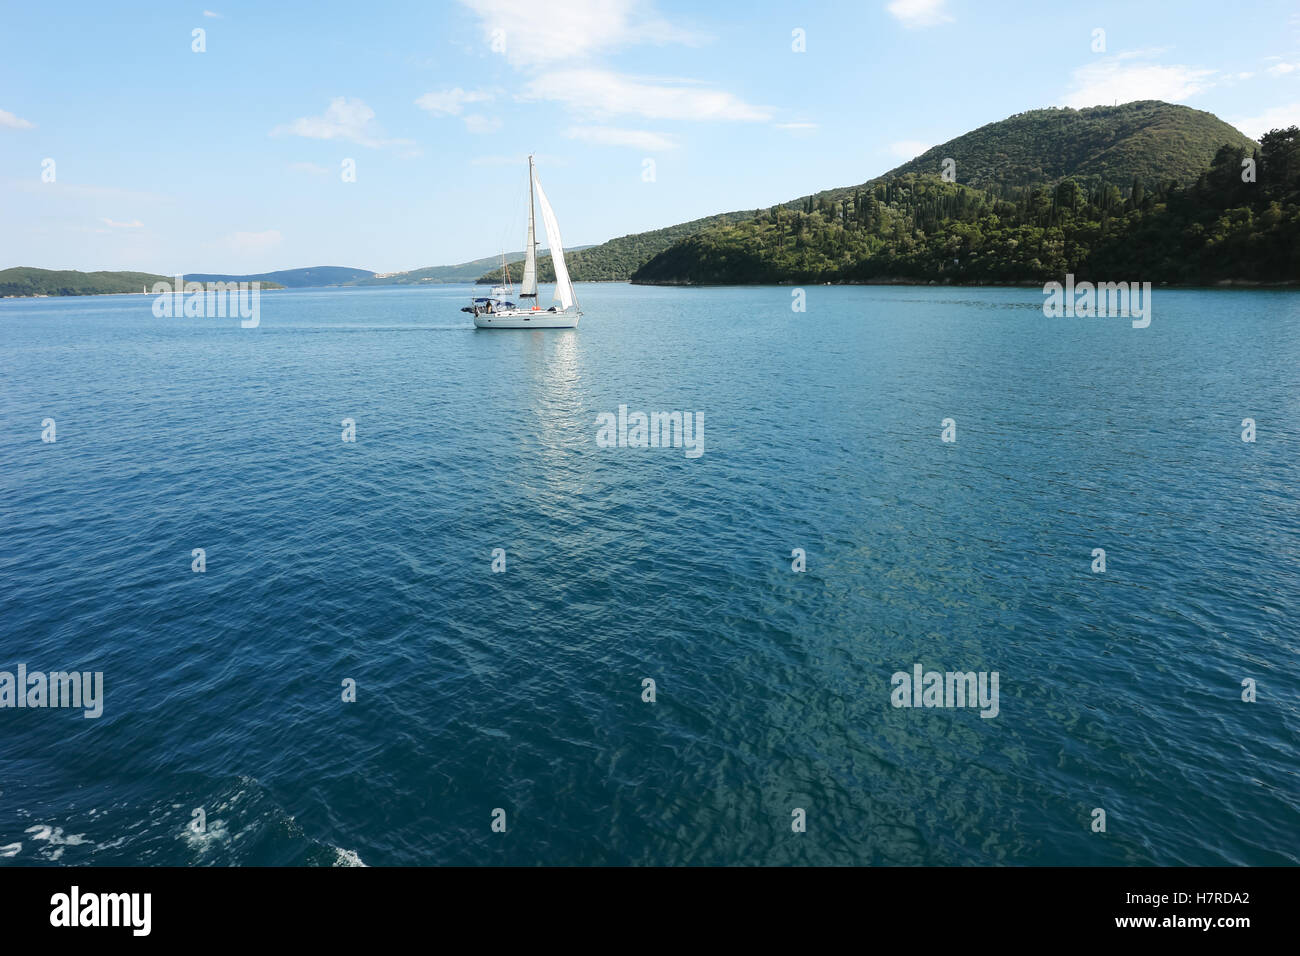 Lefkada, GREECE, May 11, 2013: Panoramic view with green islands, mountains and yacht in Ionian sea, Greece. Stock Photo